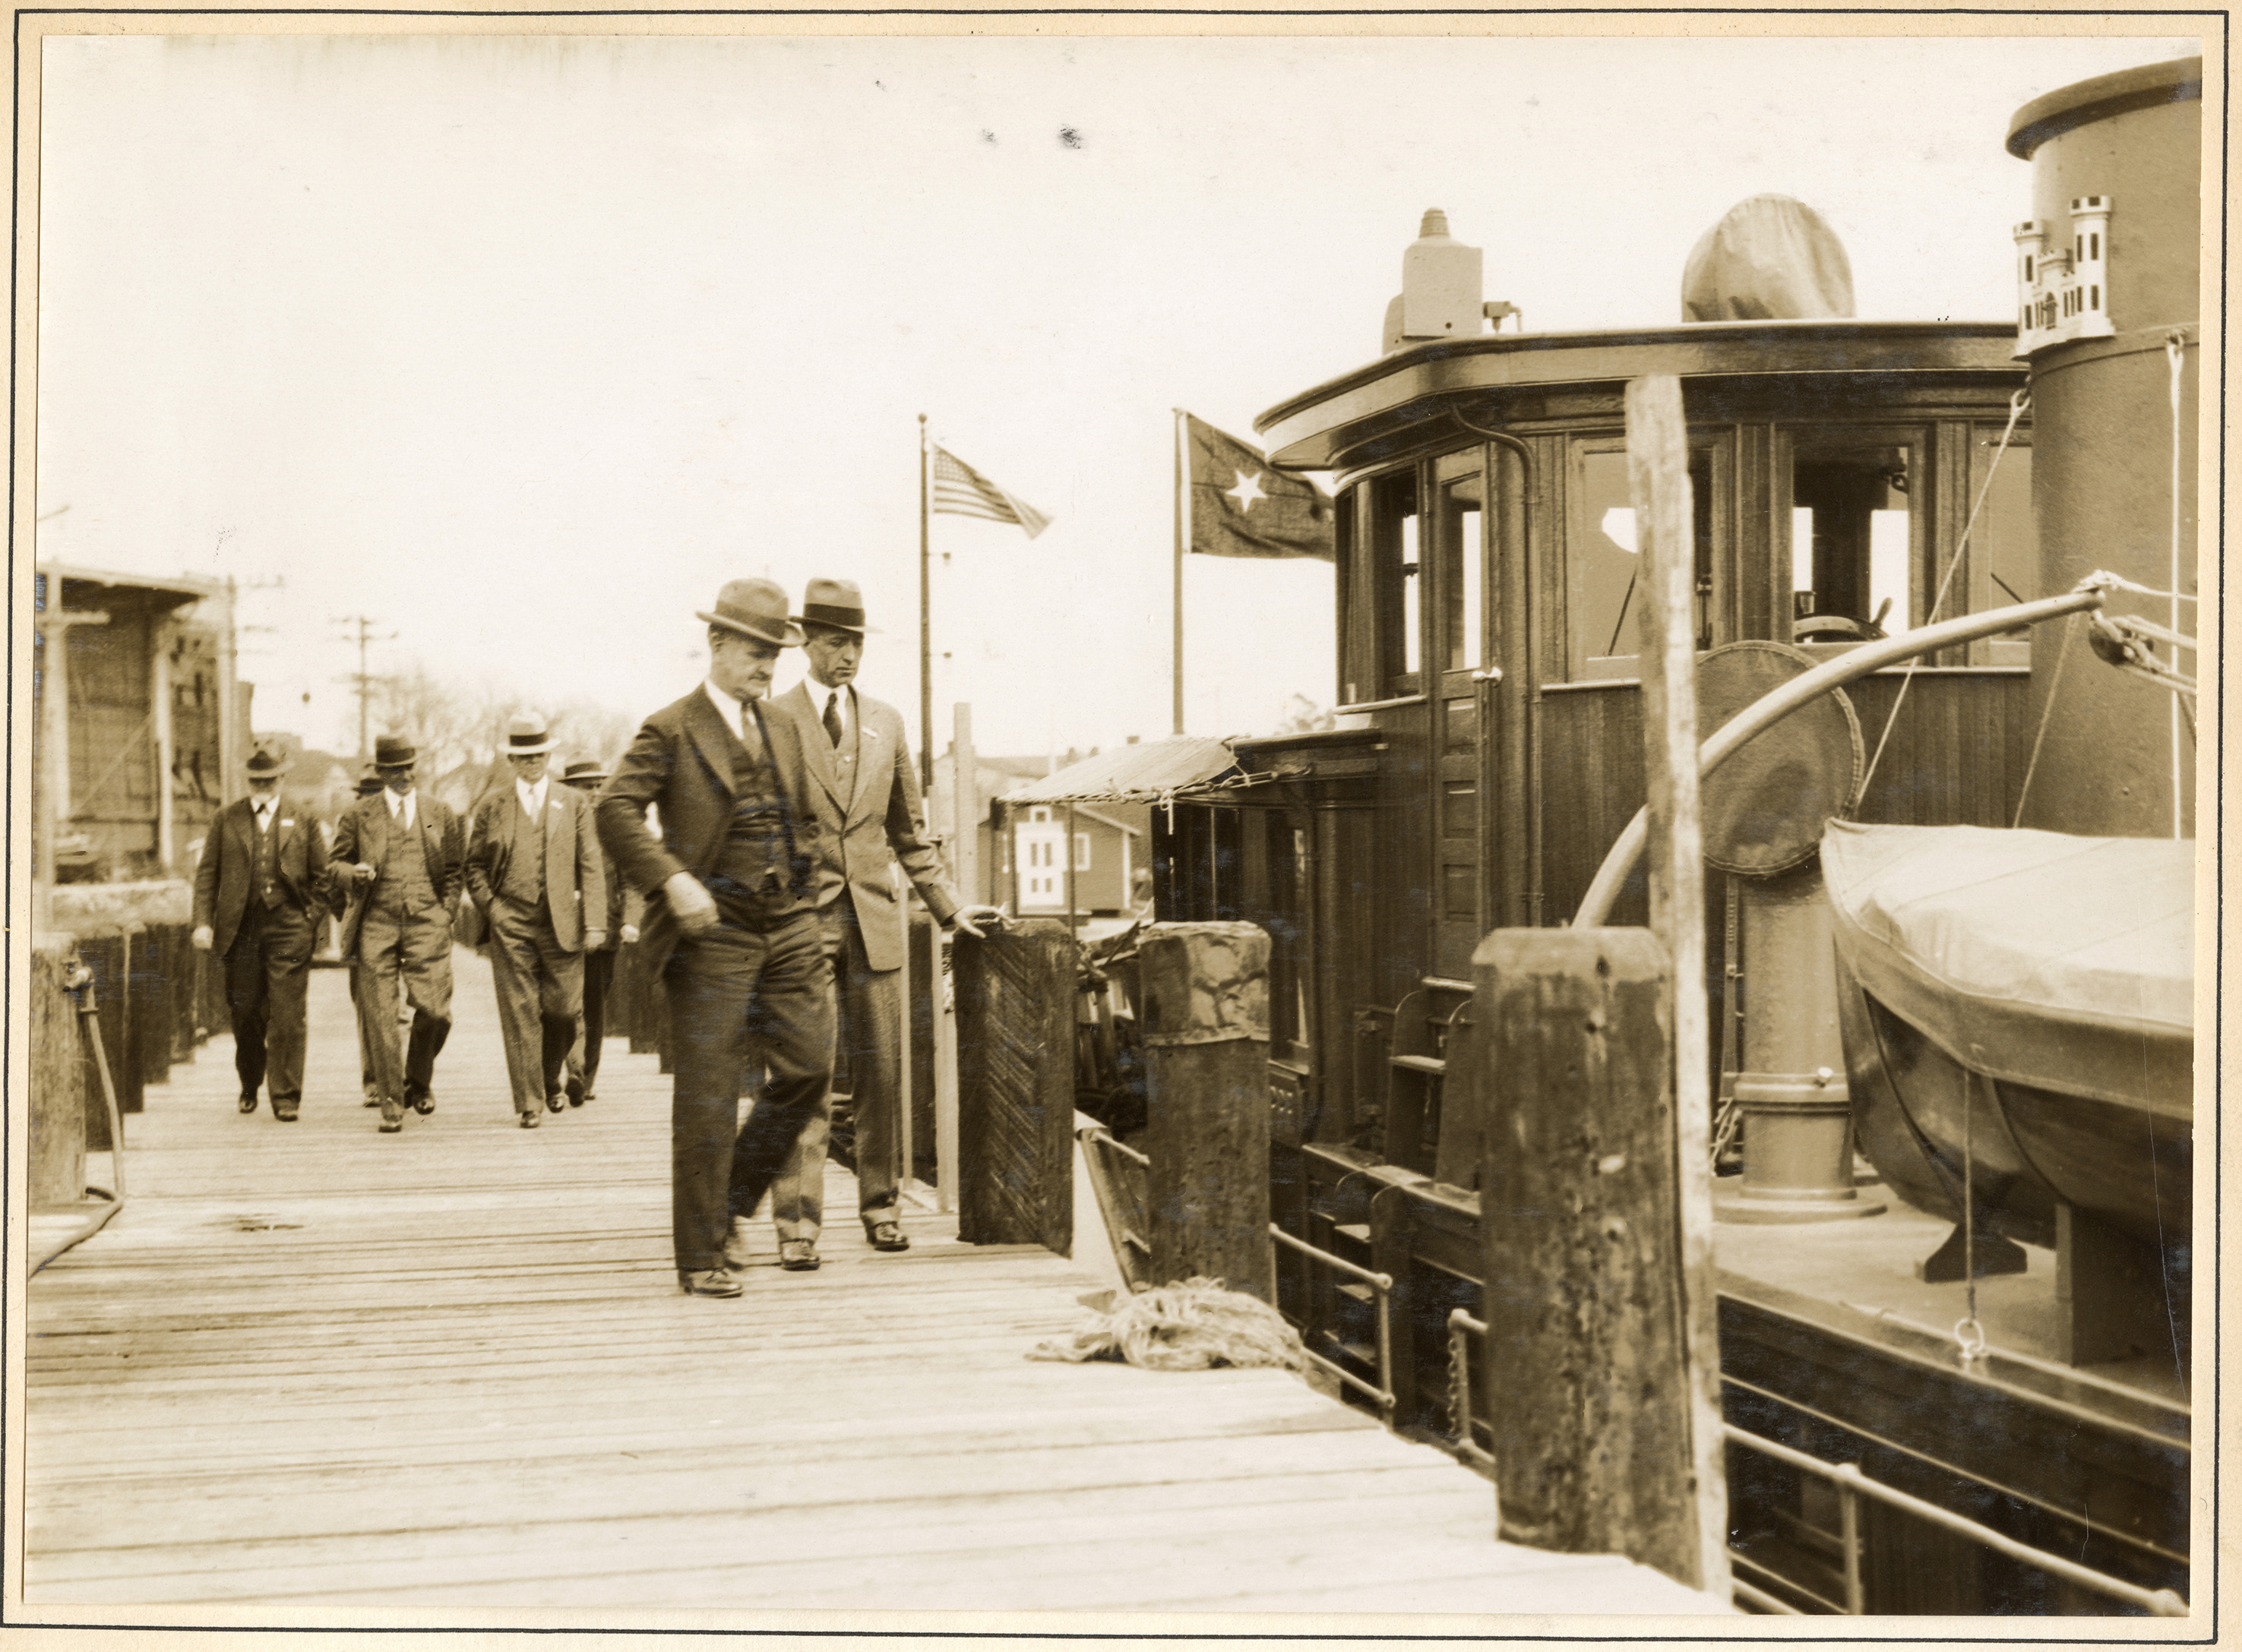 Two men in suits and hats on a dock prepare to board a small boat